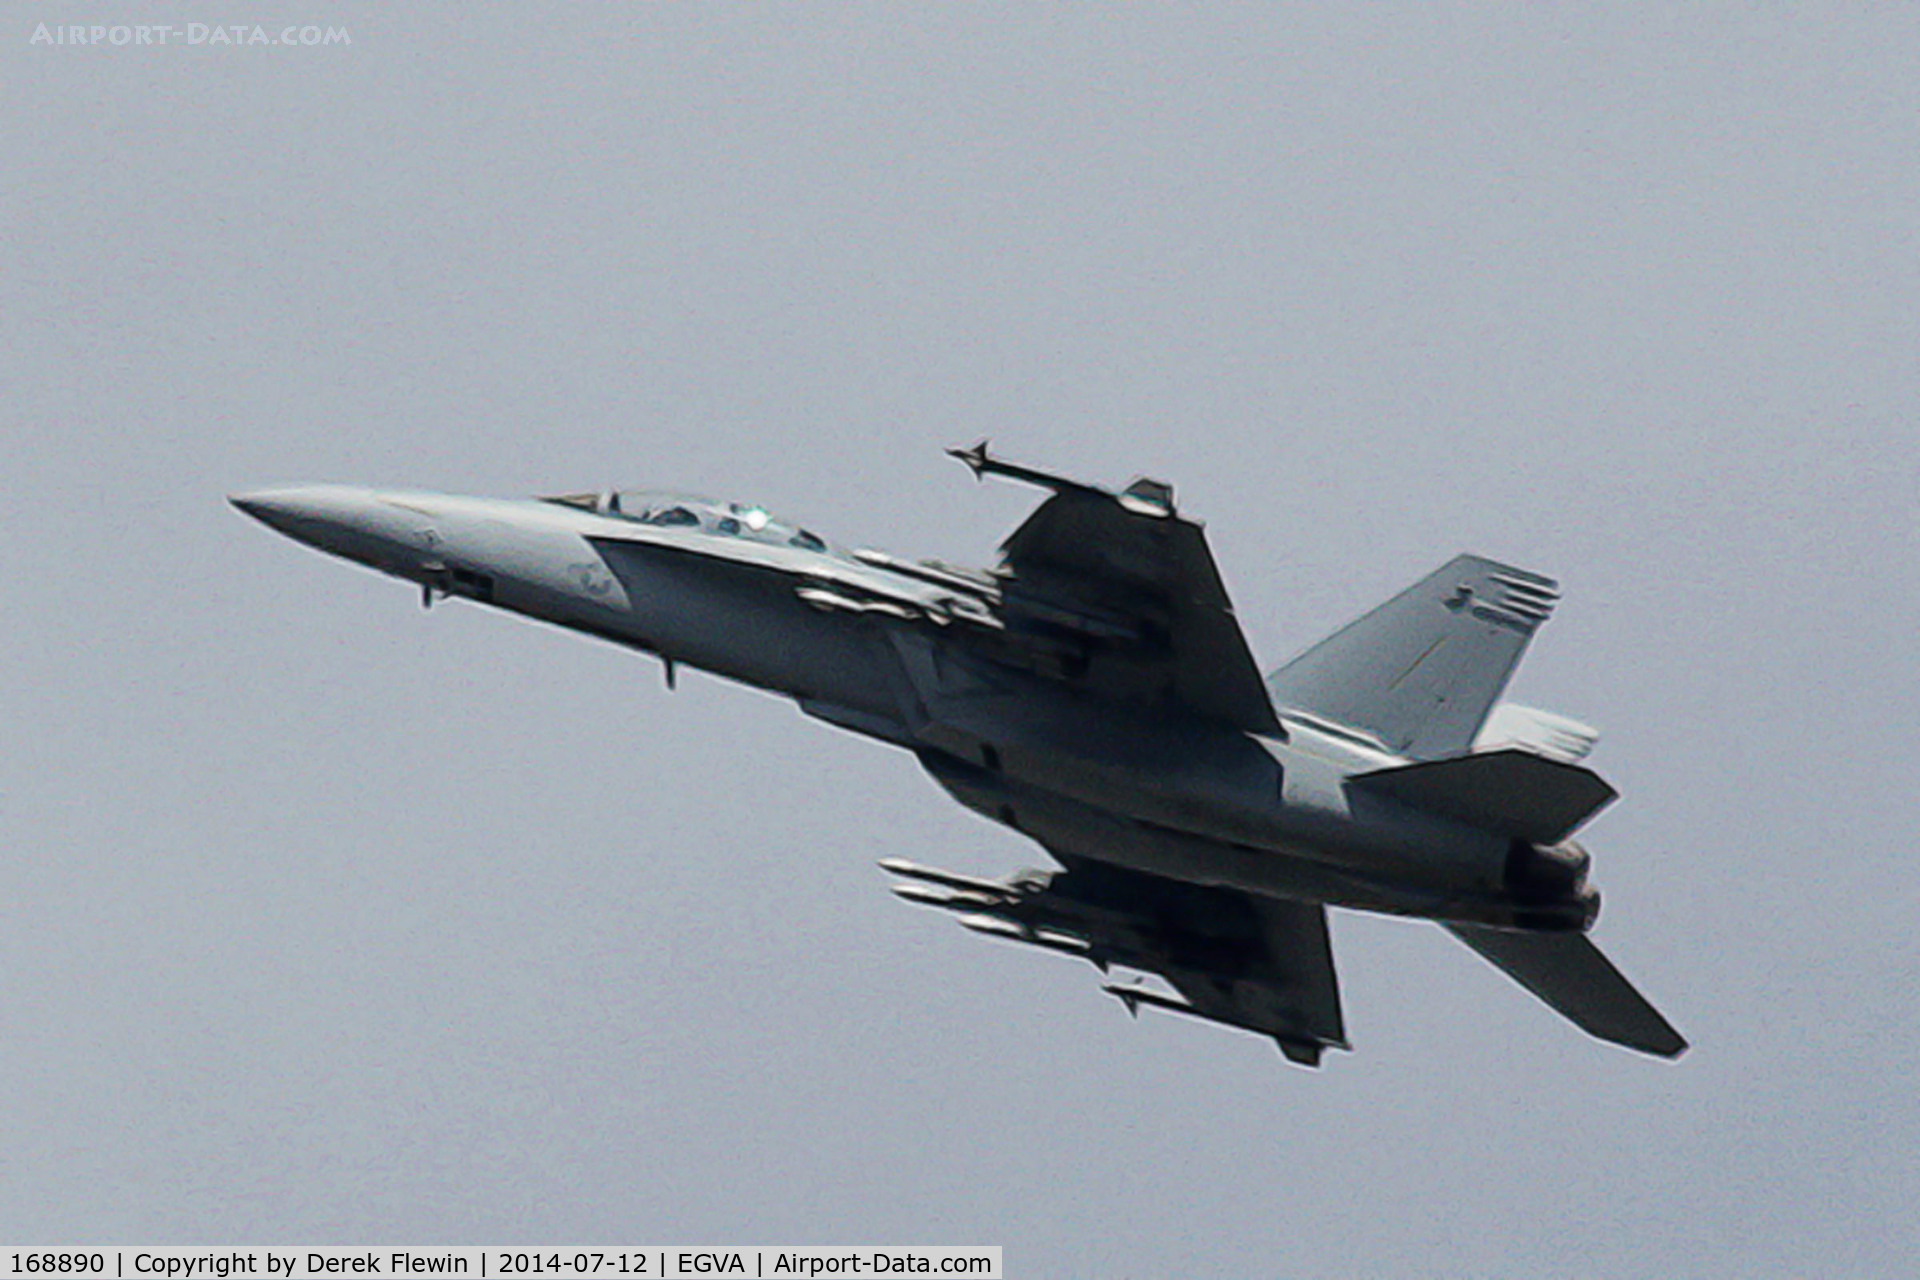 168890, Boeing F/A-18F Super Hornet C/N F271, RIAT 2014, F/A-18F Super Hornet, US Navy, VFA-106, Seen overflying the Domestic Site at RAF Fairford.